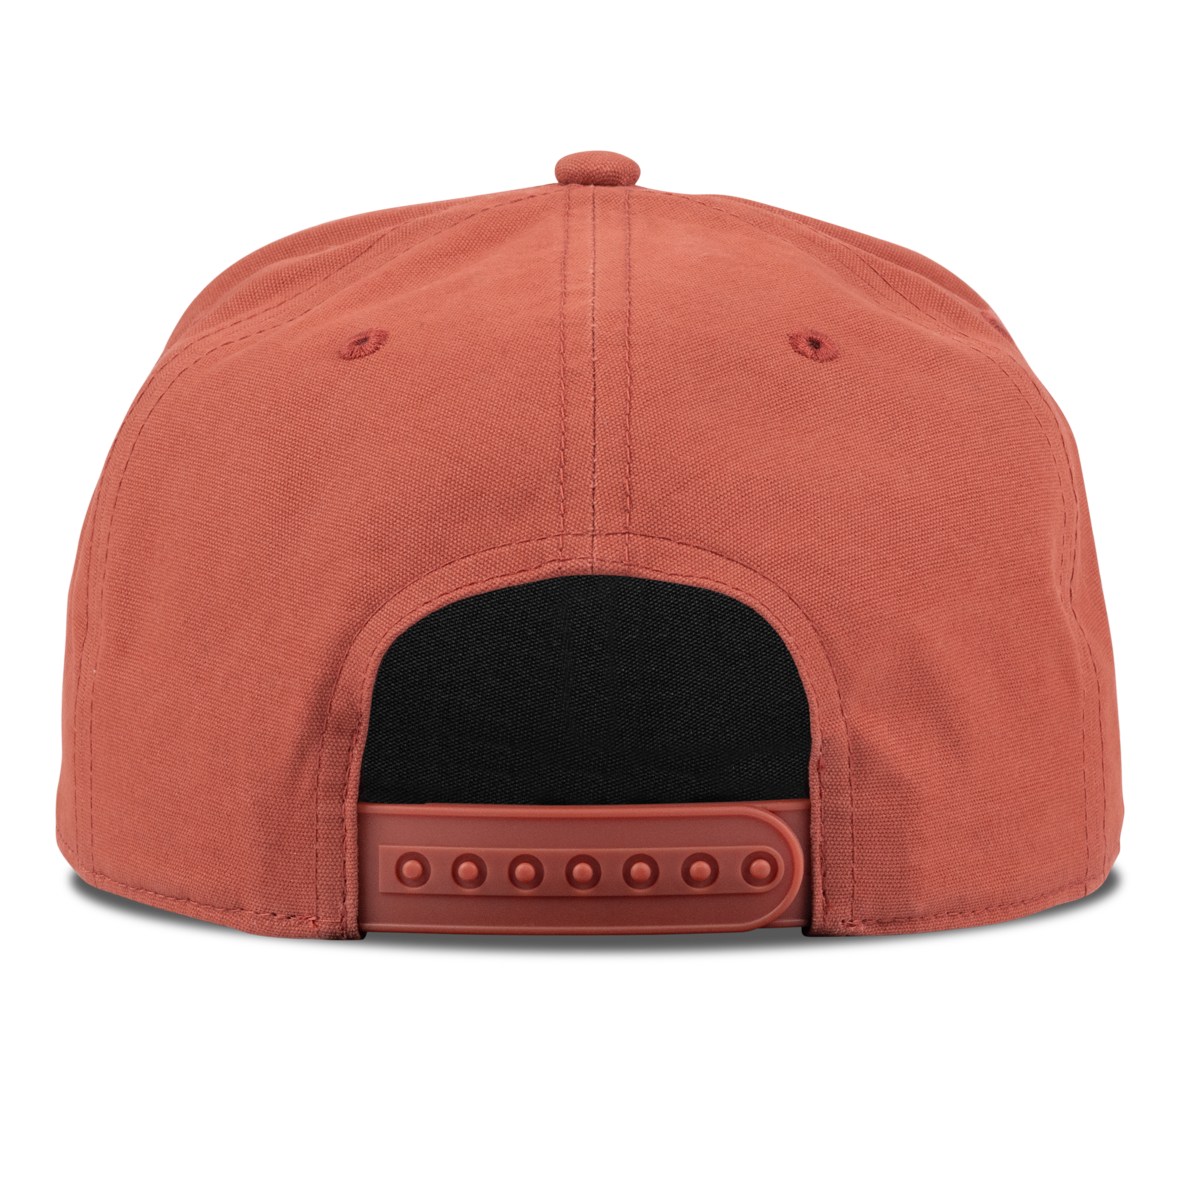 New Mexico 47 Canvas 5 Panel Rope Back Peach 